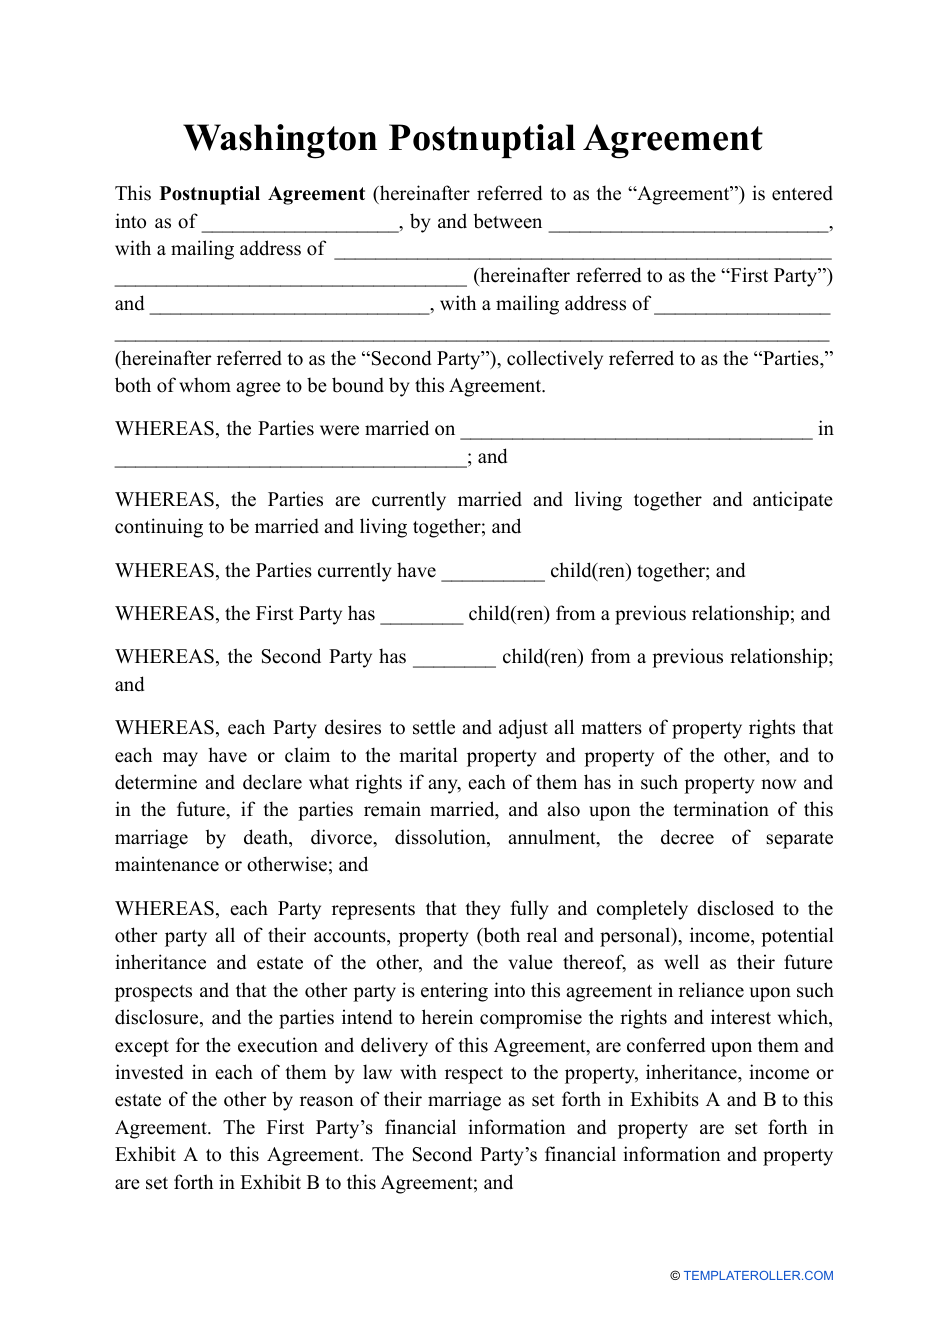 Washington Postnuptial Agreement Template Fill Out, Sign Online and